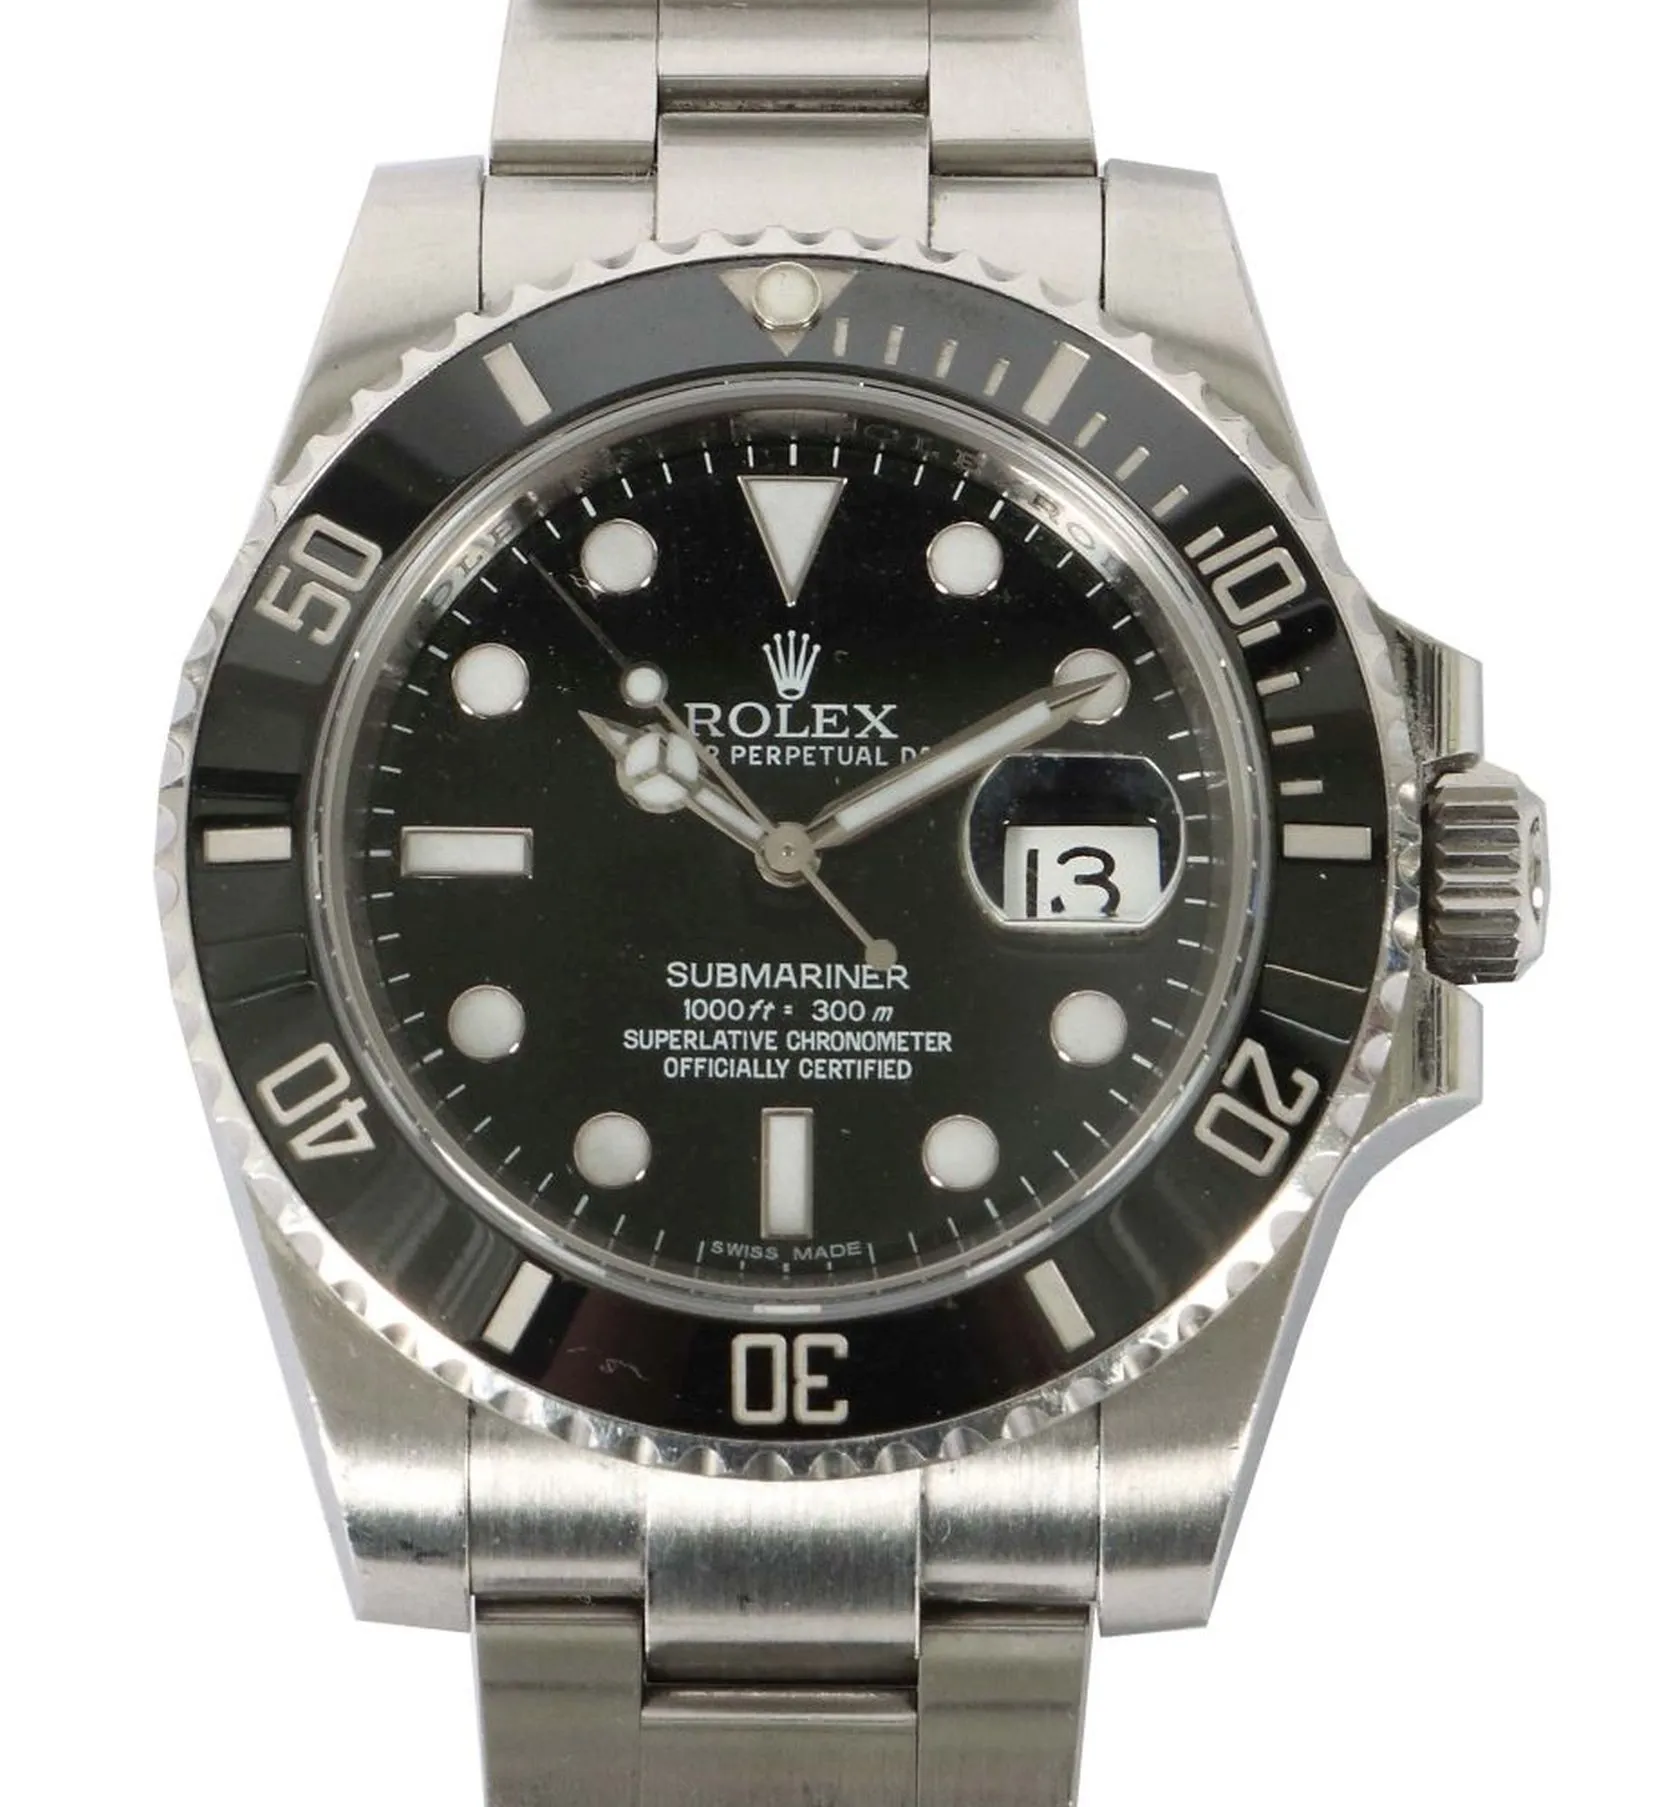 Rolex Submariner 116610LN 41mm Stainless steel black dial